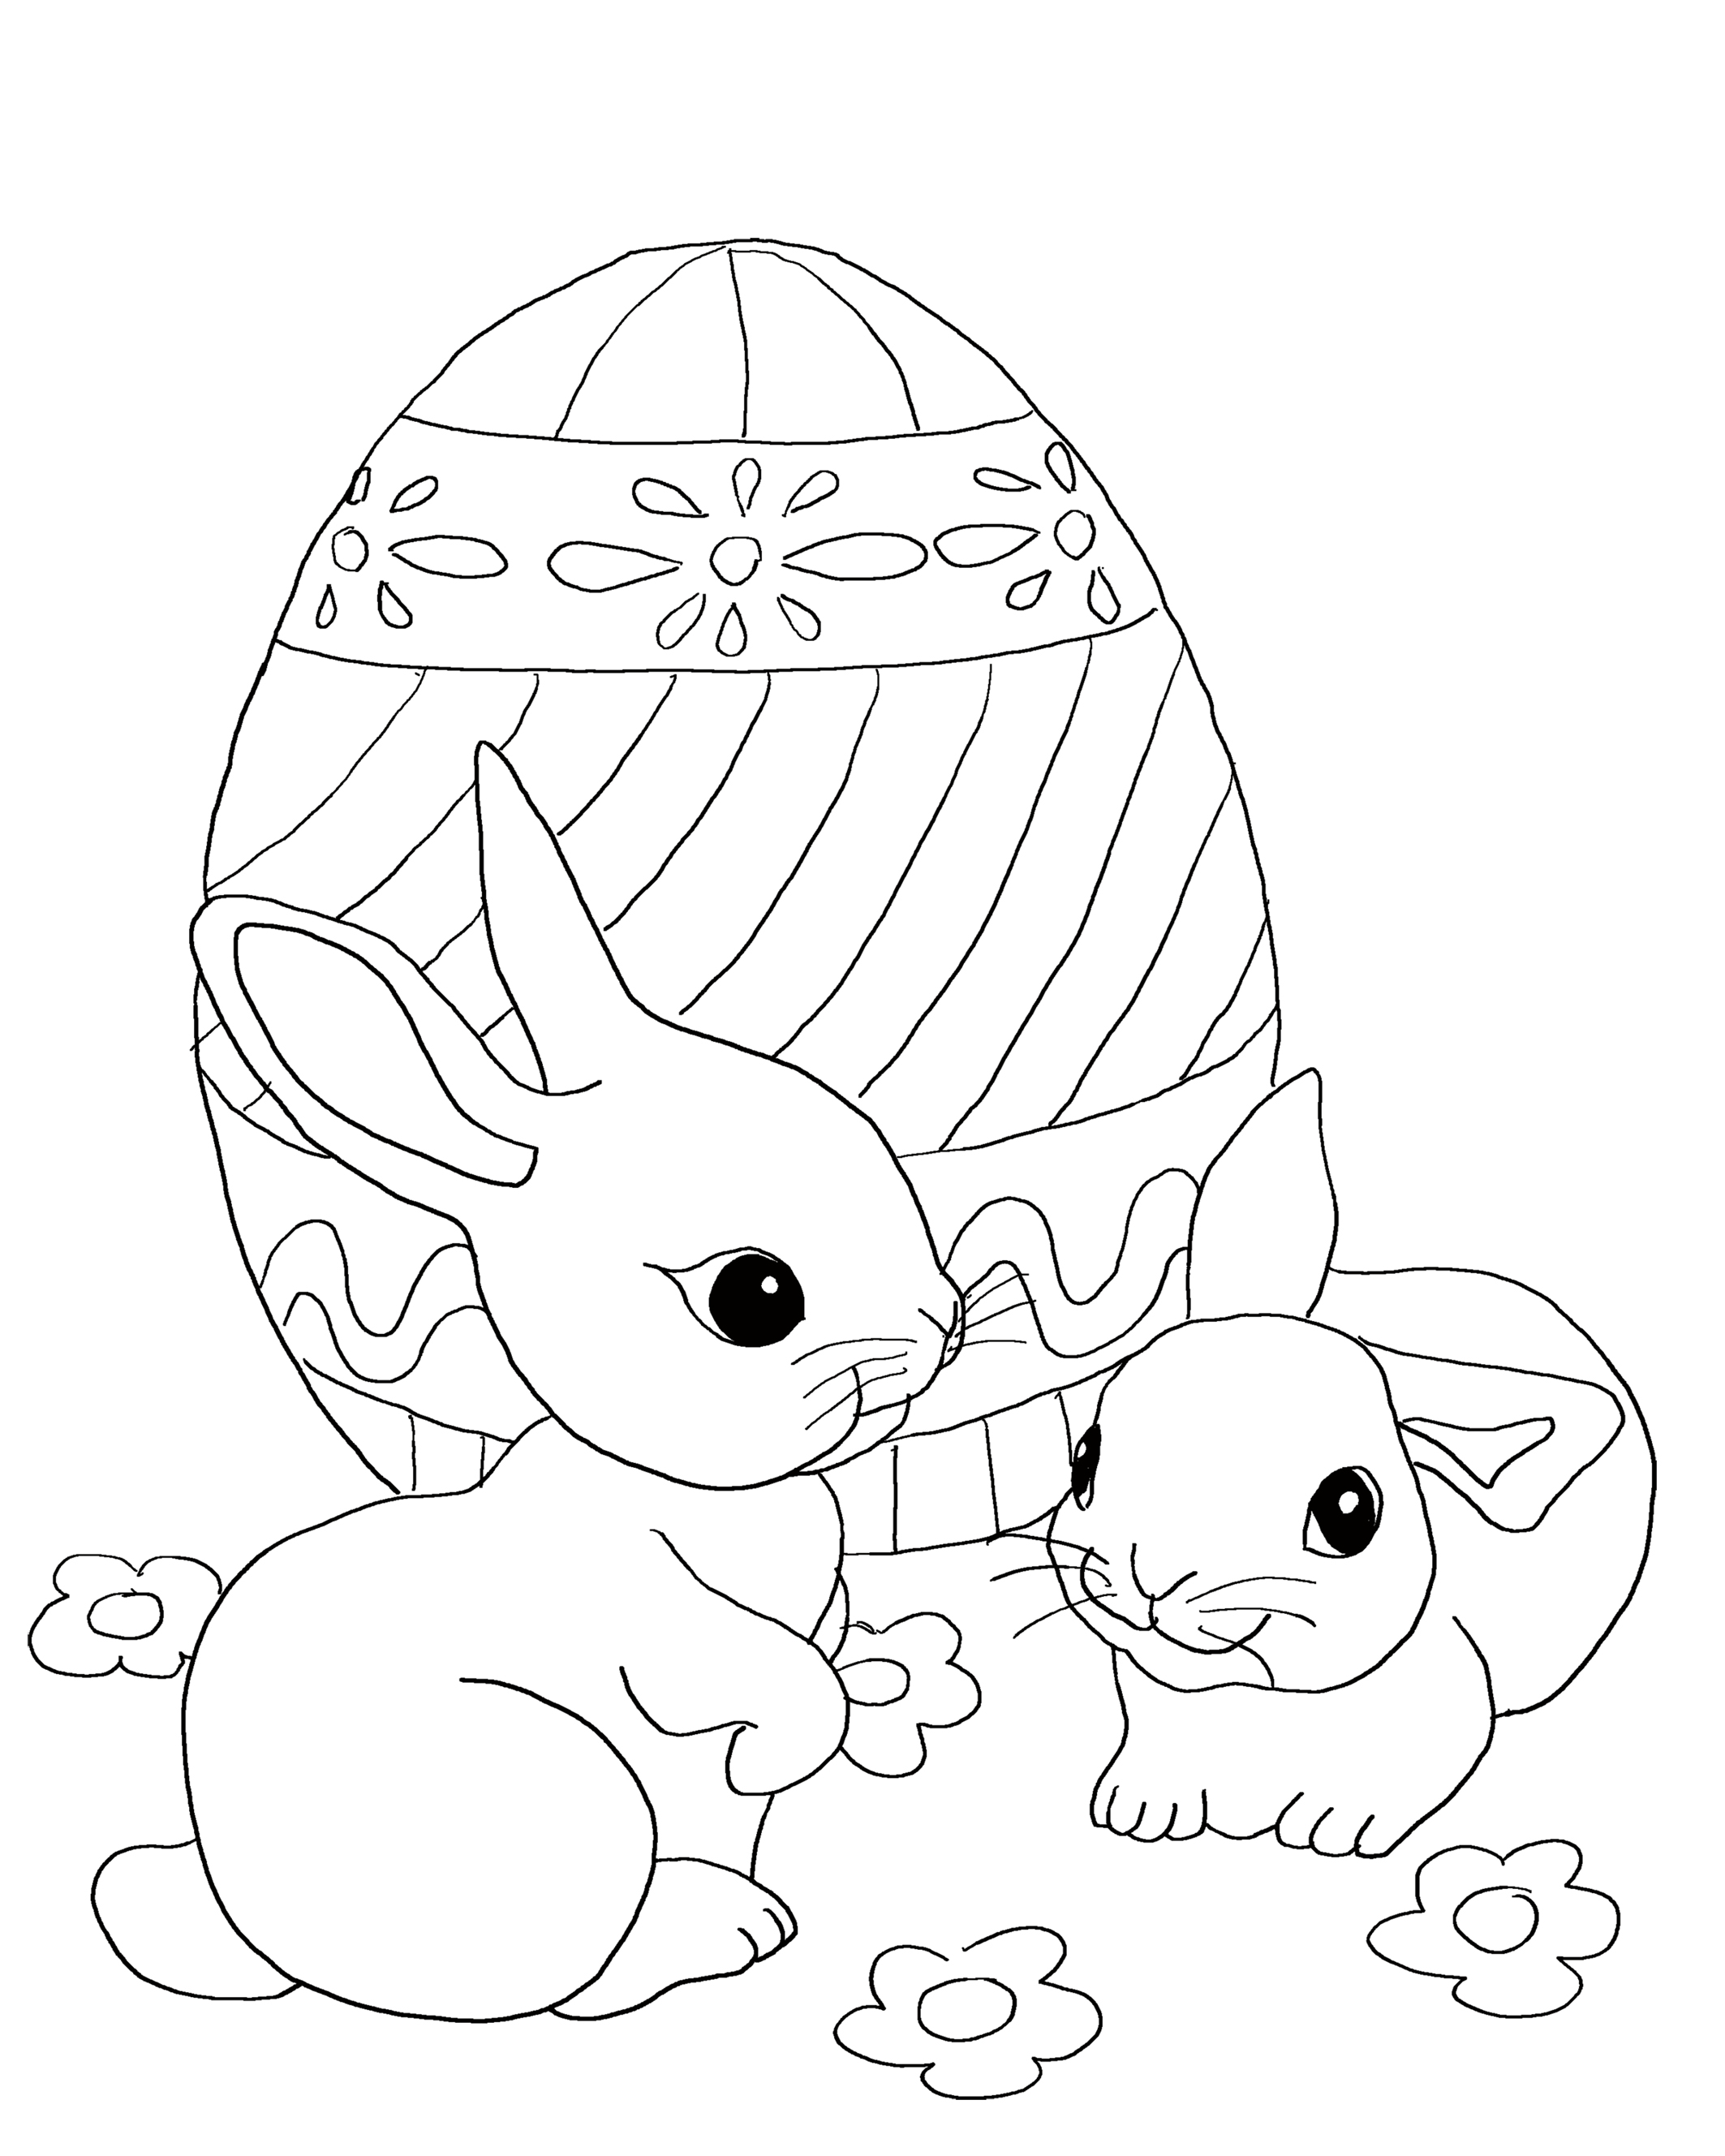 Download Free Easter Coloring Pages for Kids: High Printing Quality